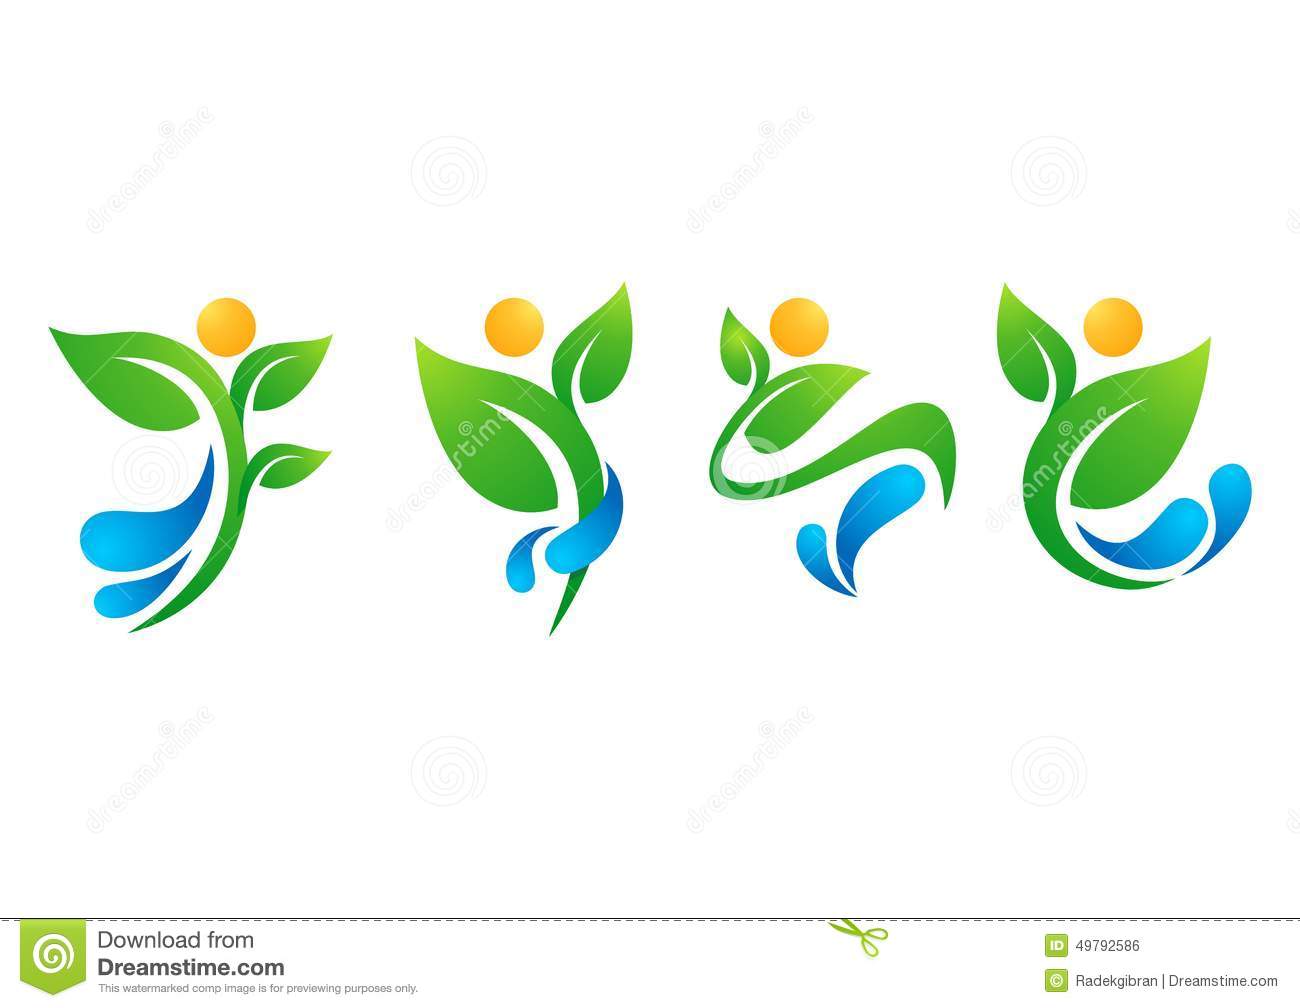 13 Plant Symbol Icon Images Wall E And Eve Plant Plant Vector Symbols And Logos Water Drop Icons Newdesignfile Com